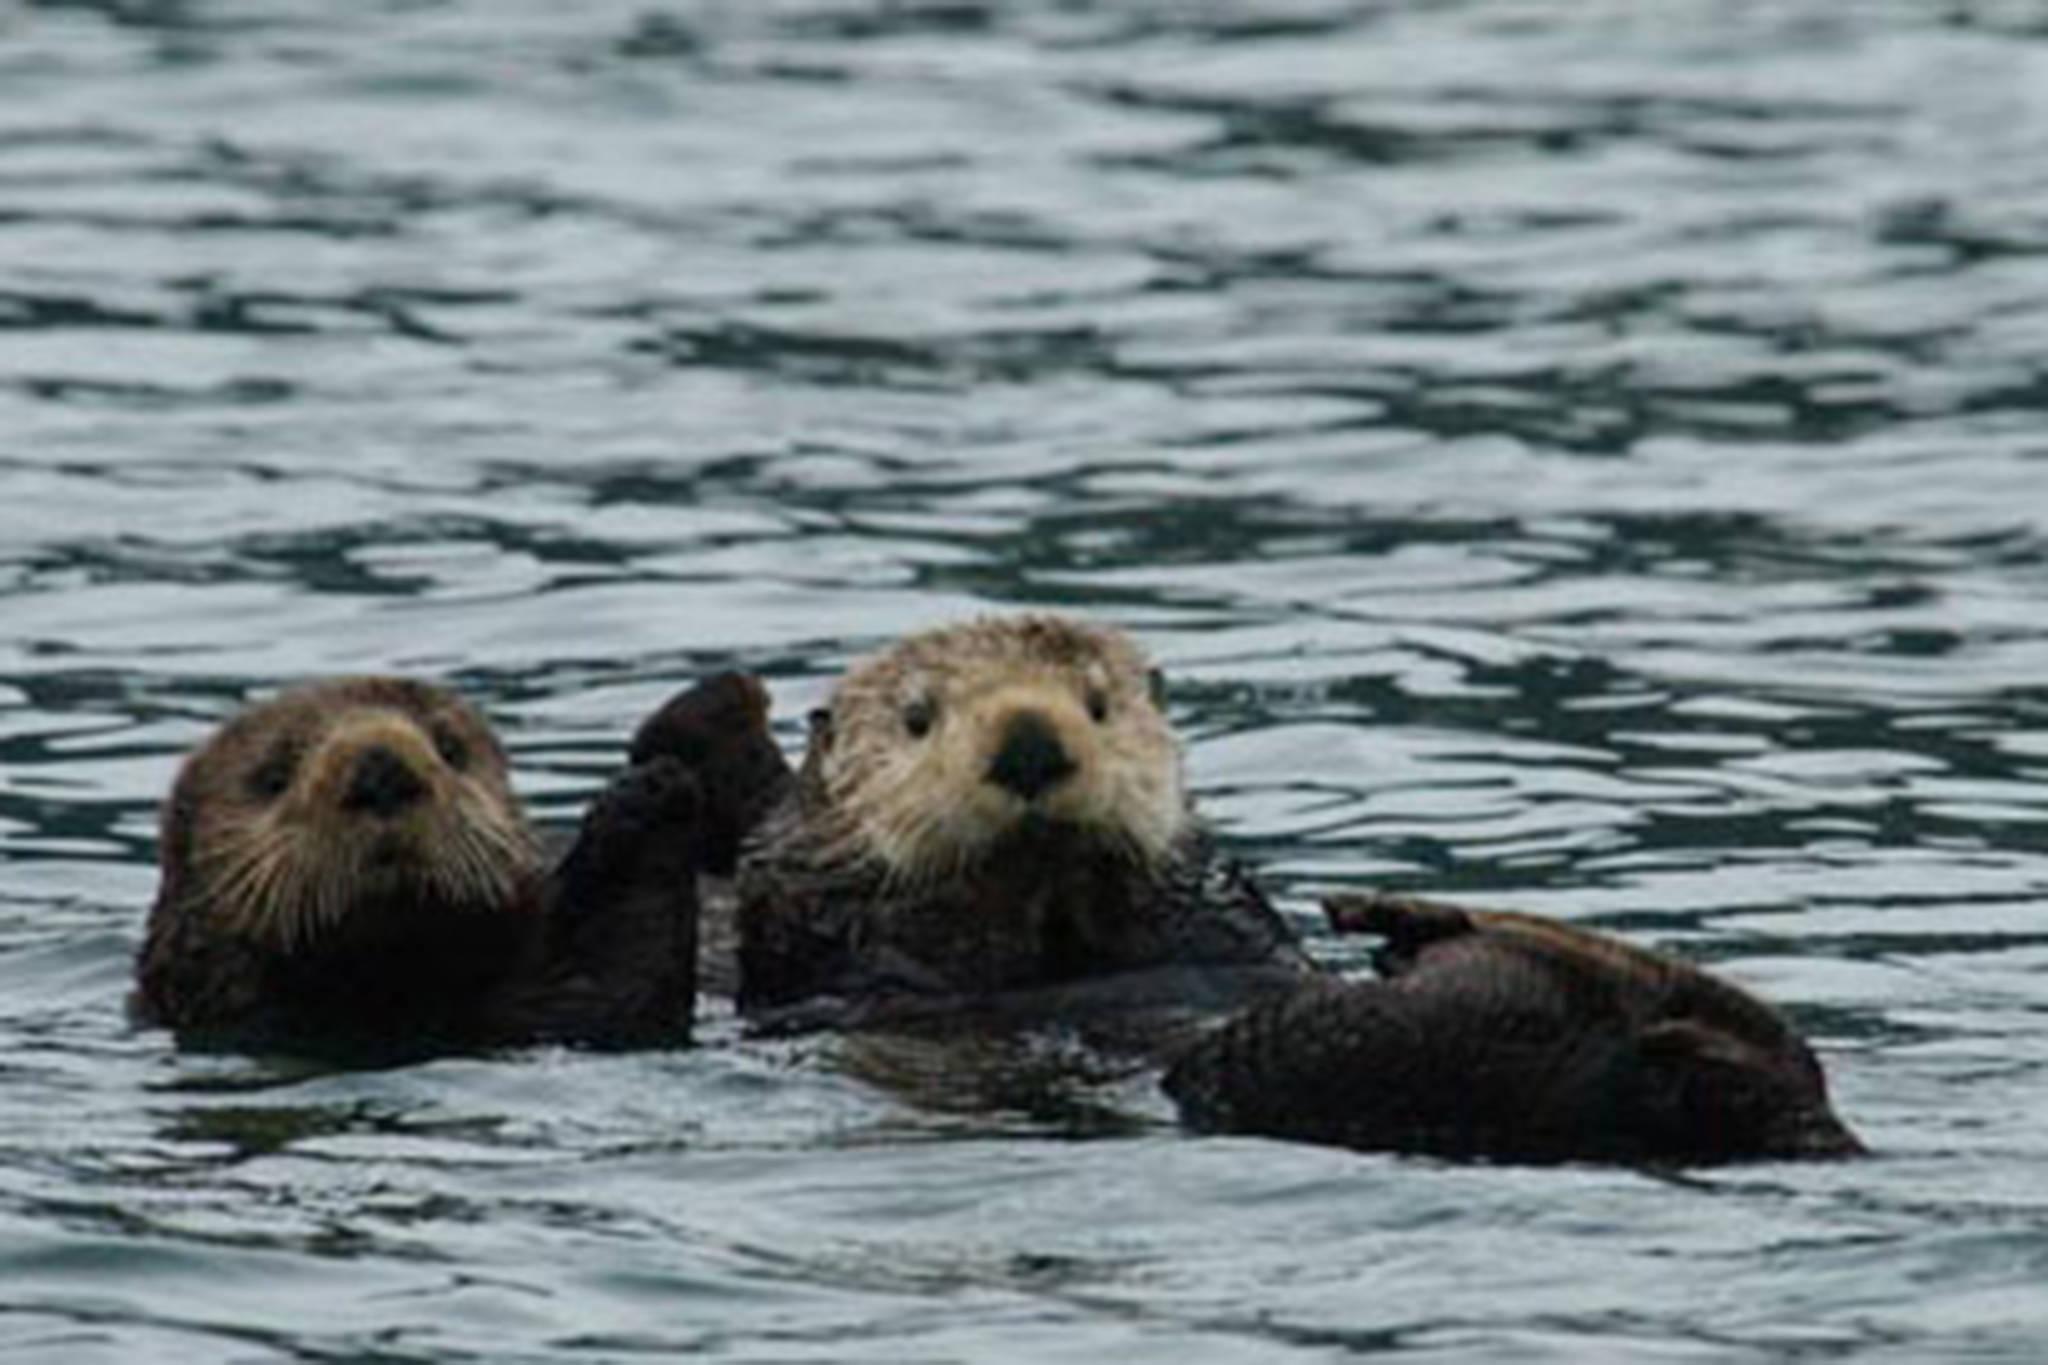 sea otter holding hands quote